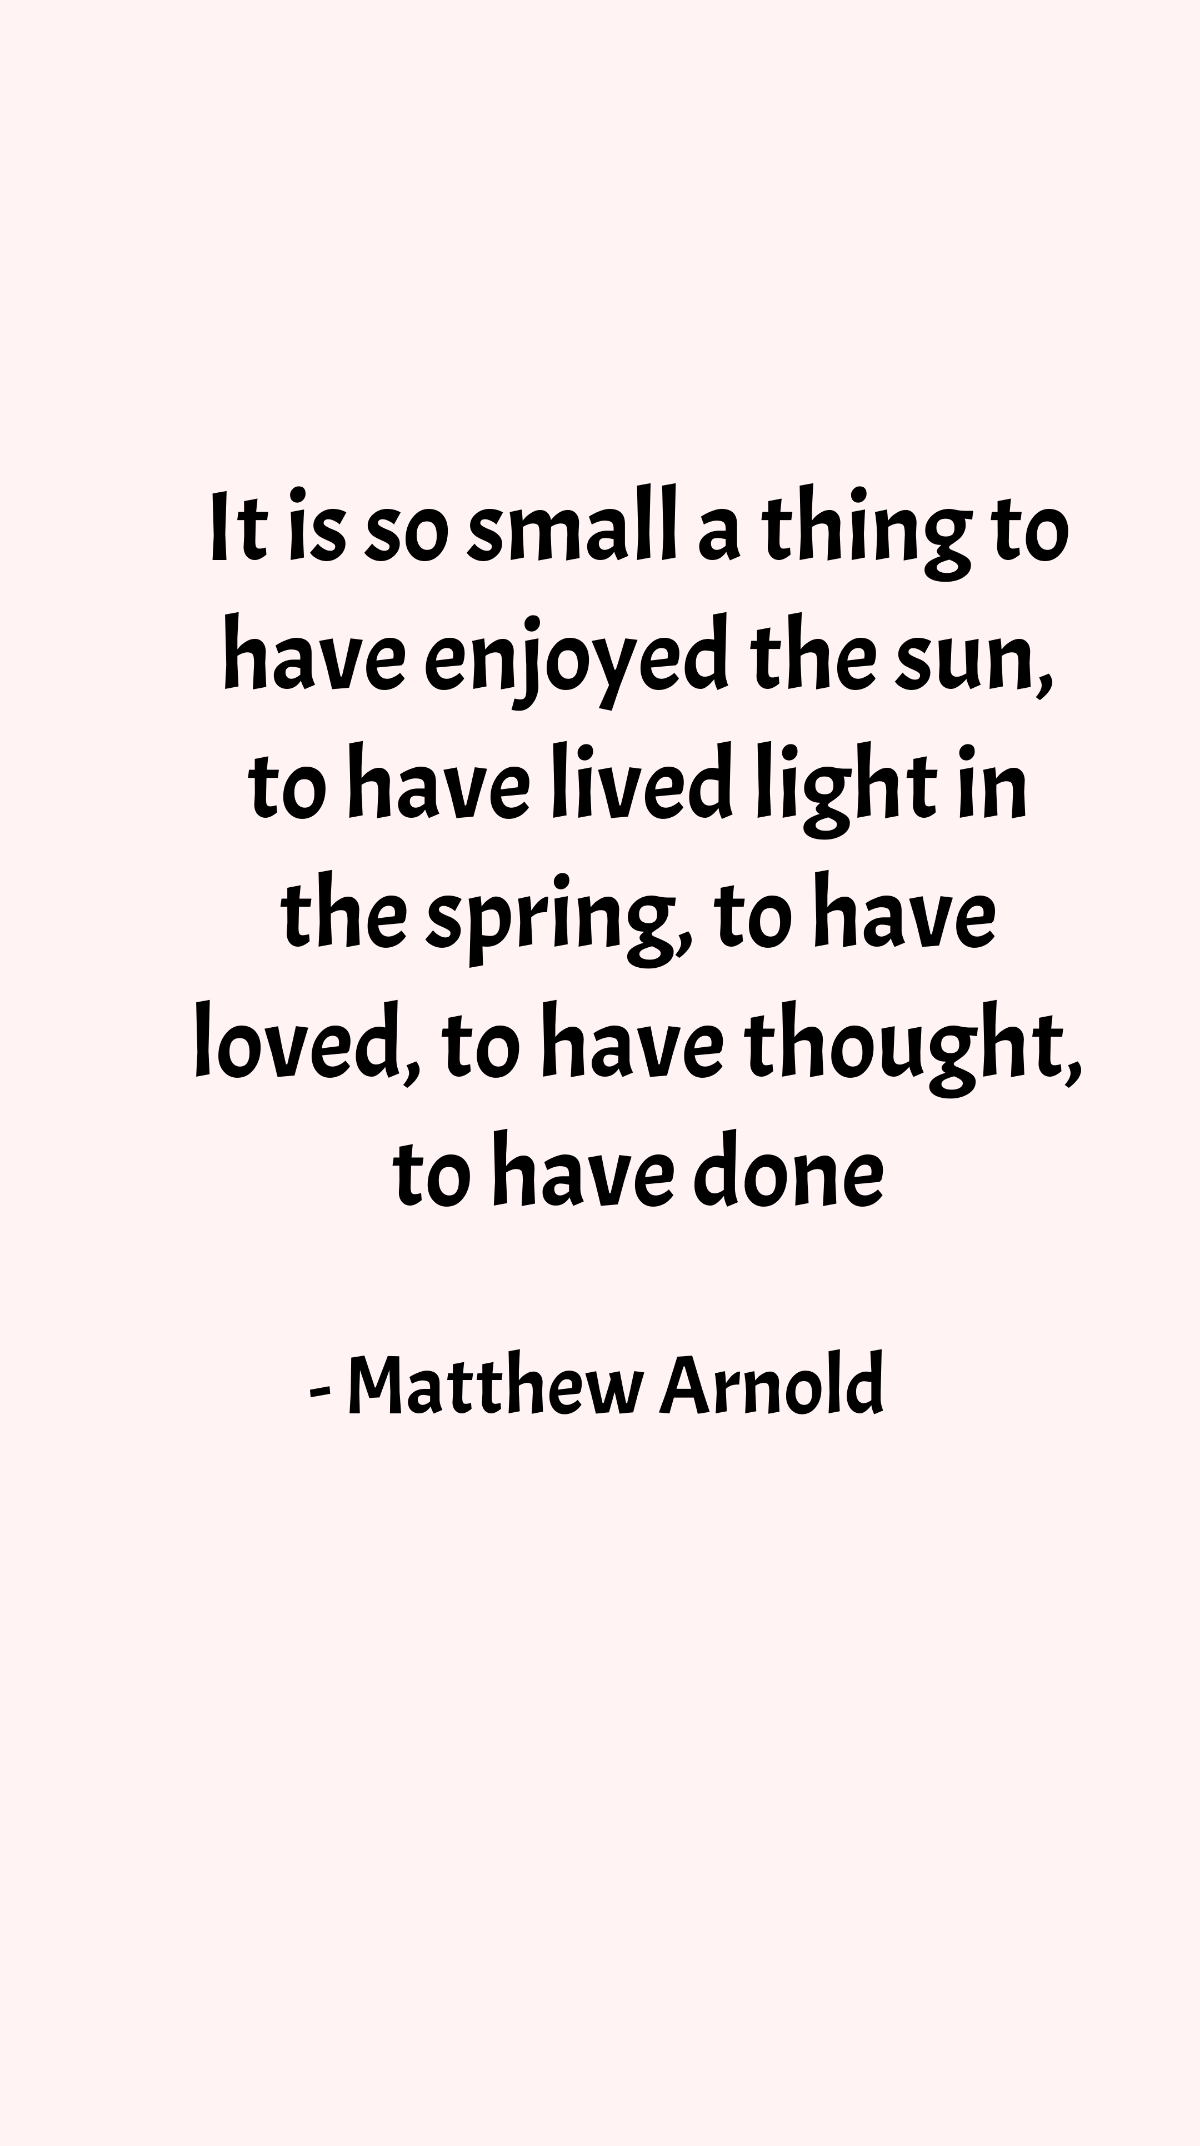 Matthew Arnold - It is so small a thing to have enjoyed the sun, to have lived light in the spring, to have loved, to have thought, to have done